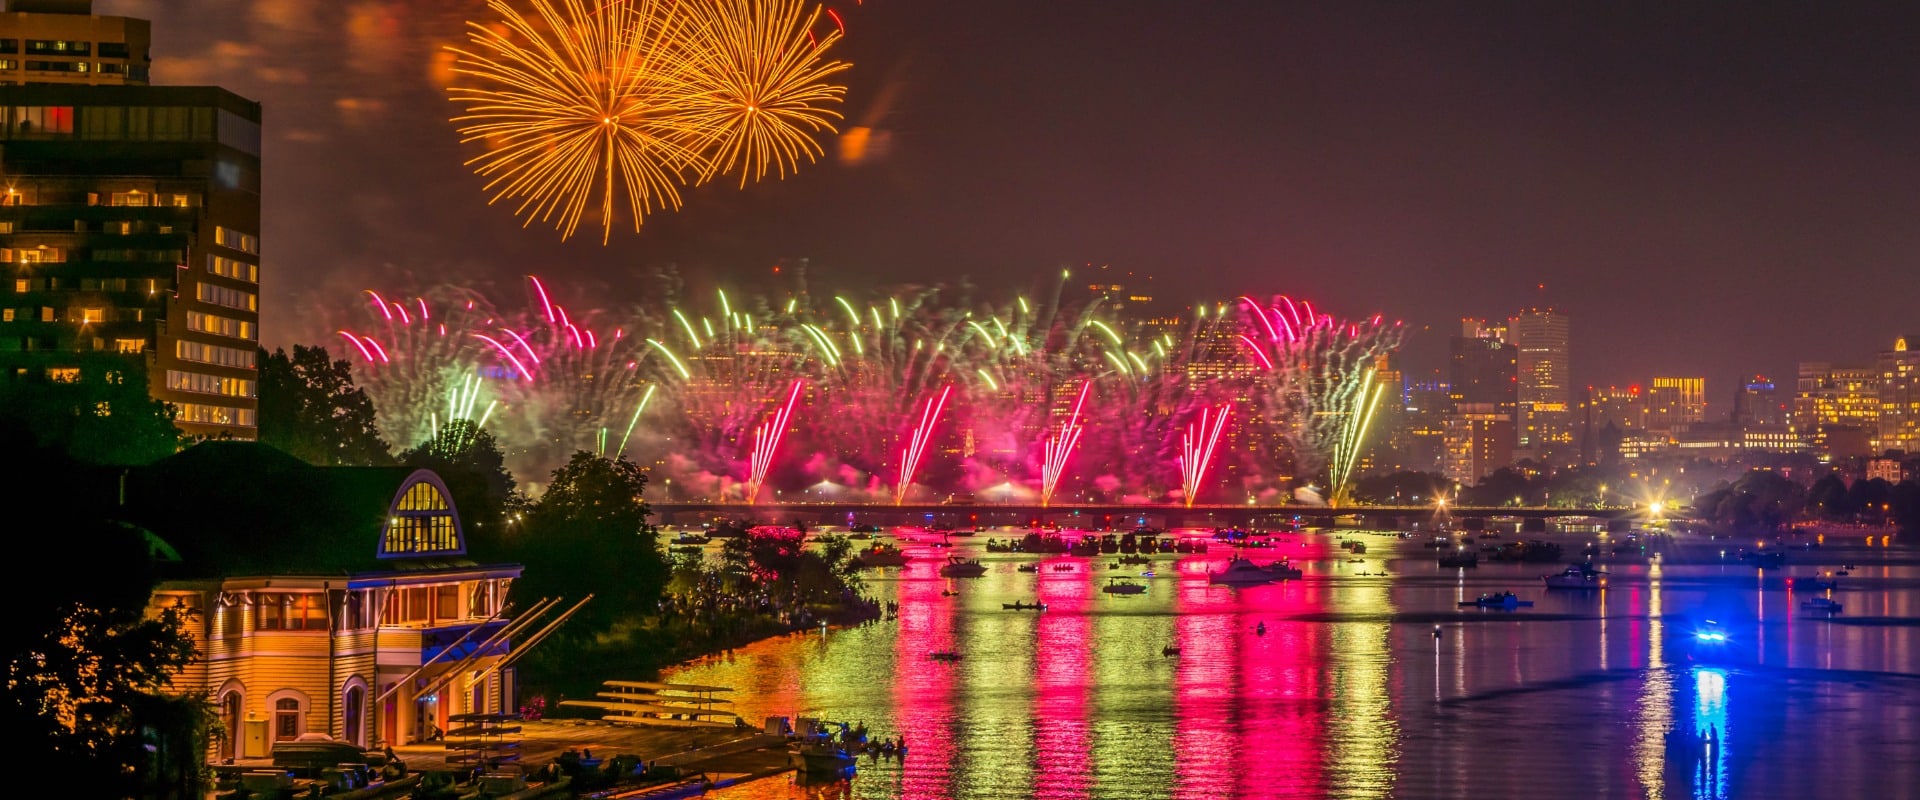 5 Things to do in Boston for 4th of July